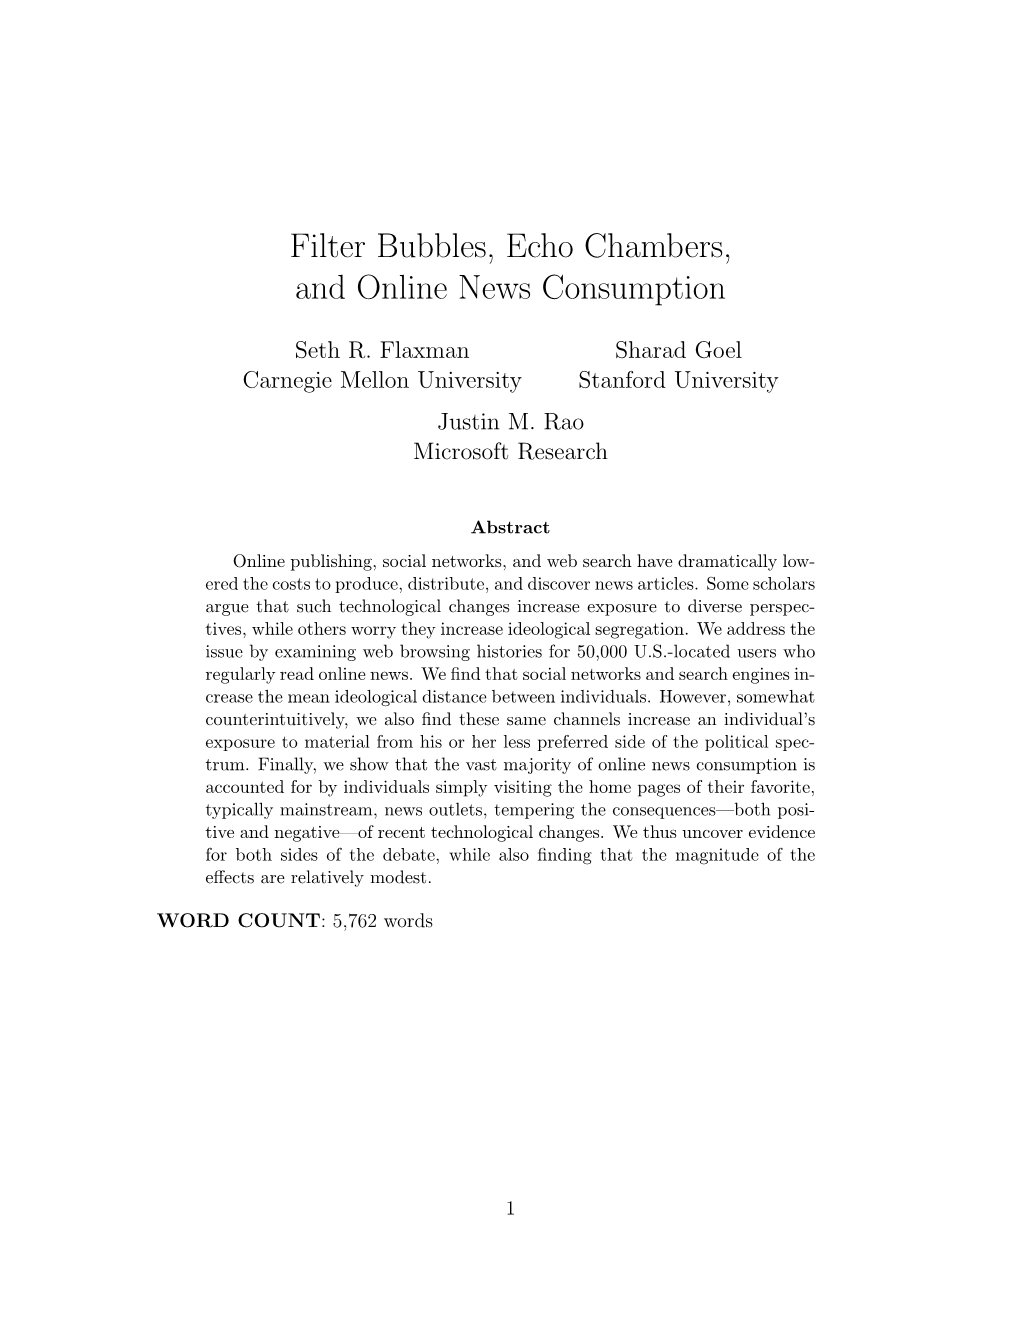 Filter Bubbles, Echo Chambers, and Online News Consumption